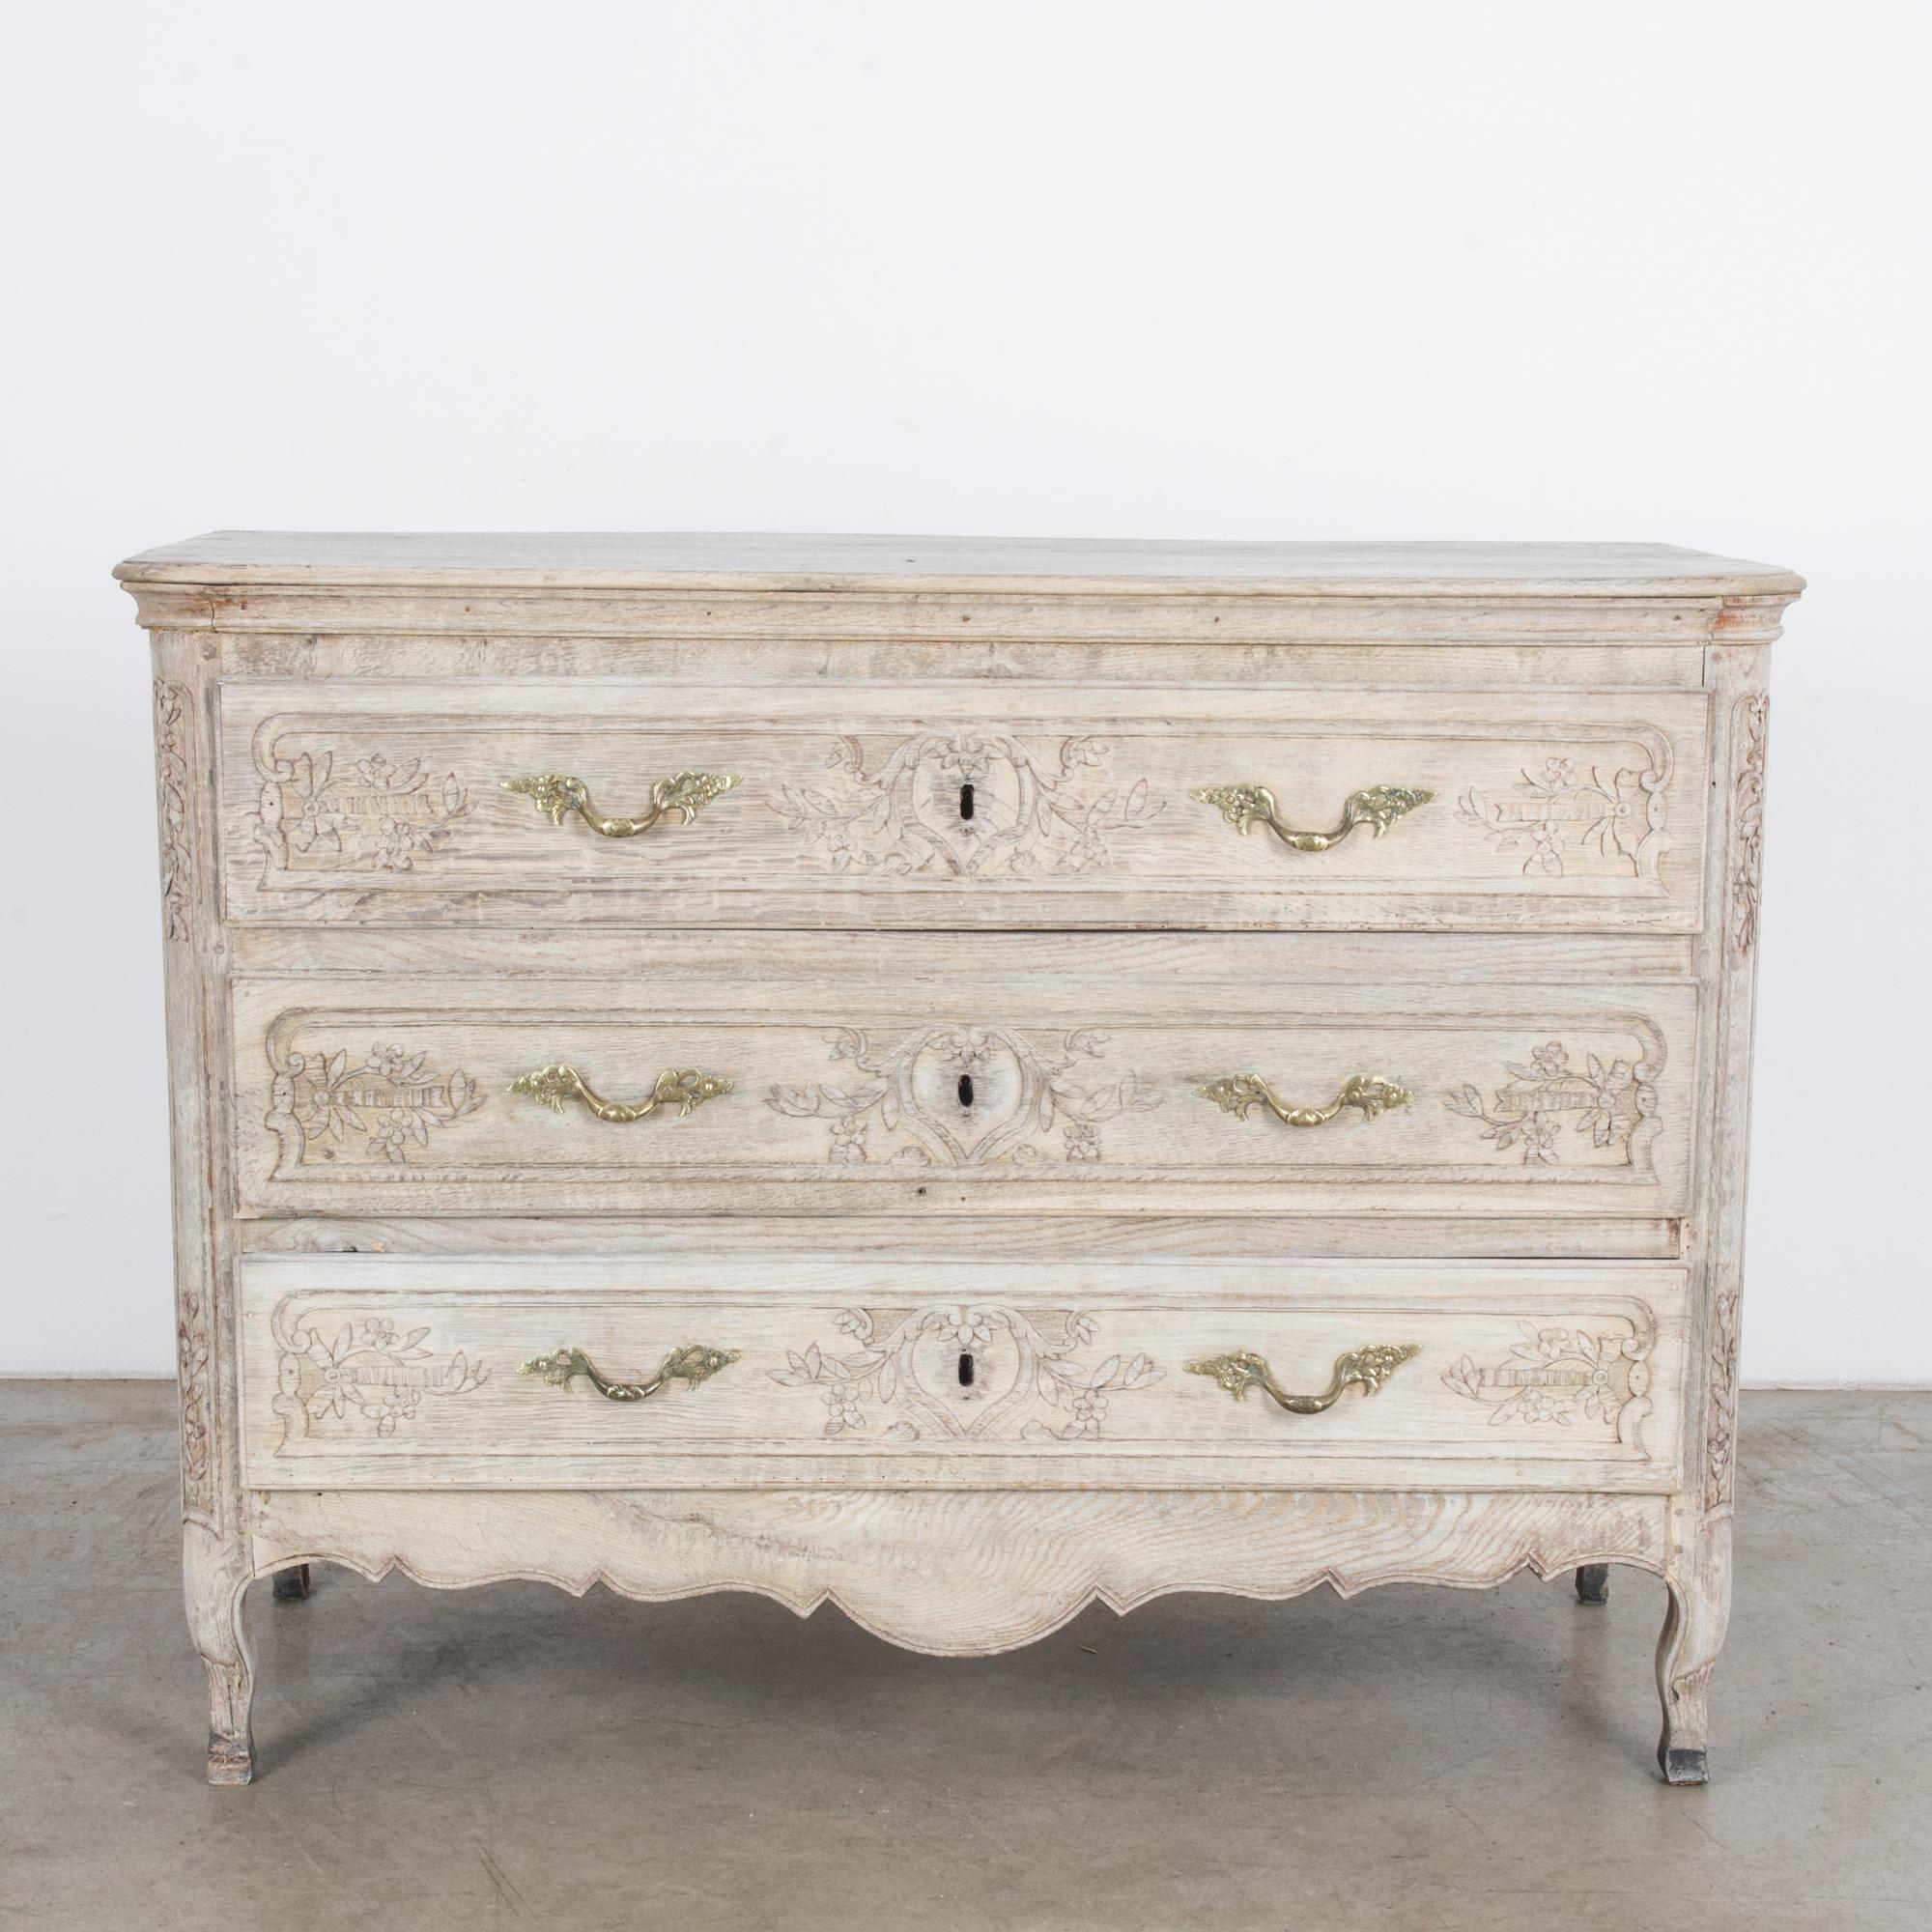 Made in 1880s France, this captivating bleached oak chest of drawers displays cabriole legs and carvings, popular features of the French Provincial style. Intricate floral and foliage carvings on the three drawers and front corners lend an old-world